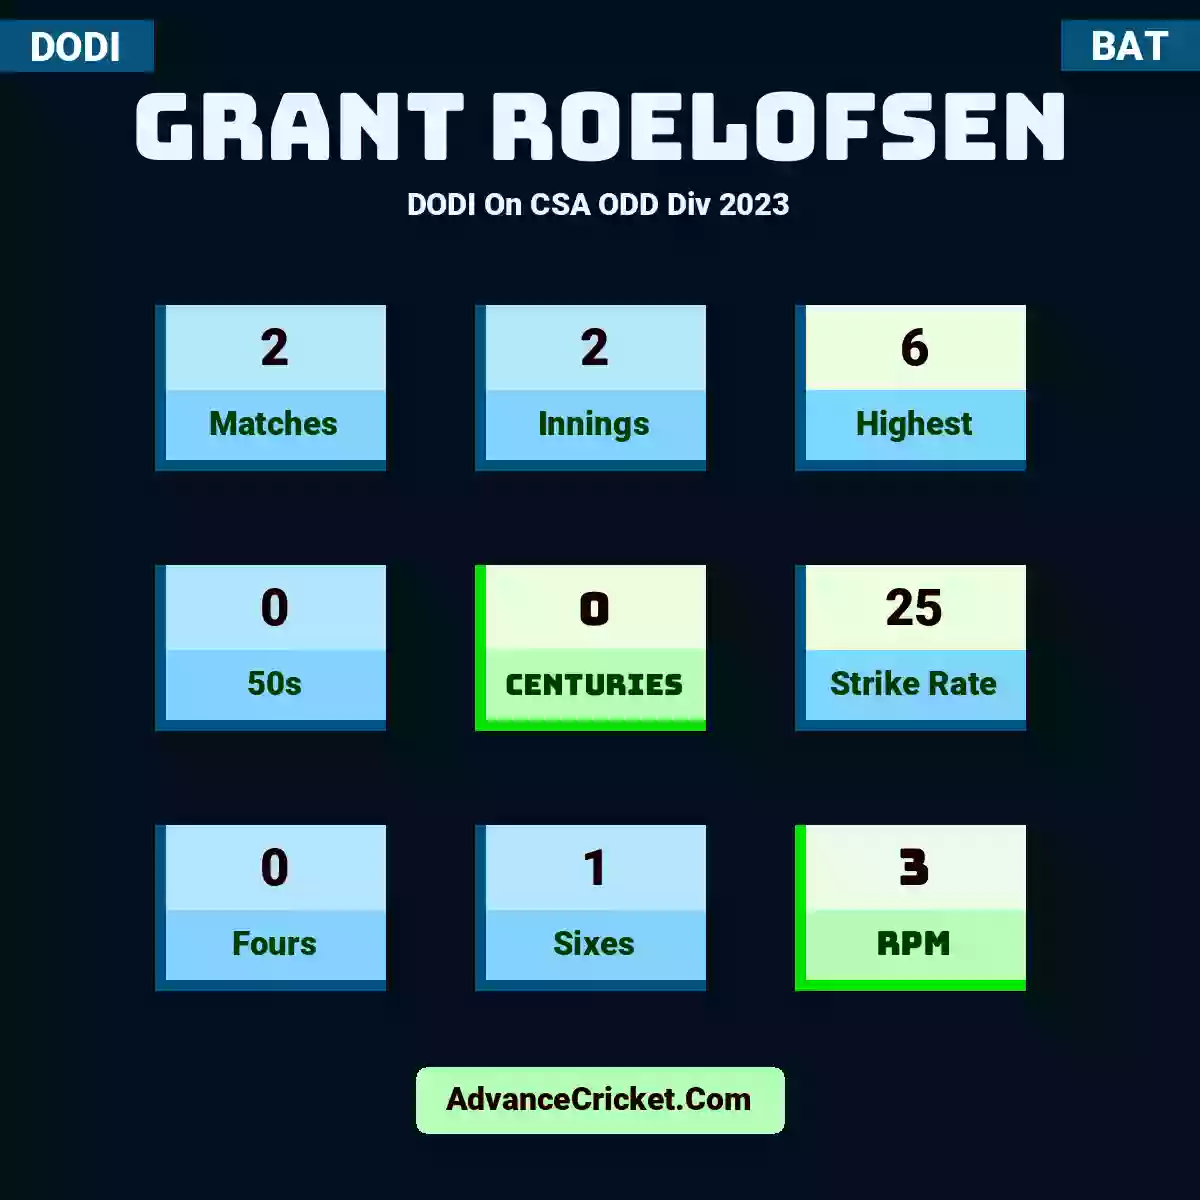 Grant Roelofsen DODI  On CSA ODD Div 2023, Grant Roelofsen played 2 matches, scored 6 runs as highest, 0 half-centuries, and 0 centuries, with a strike rate of 25. G.Roelofsen hit 0 fours and 1 sixes, with an RPM of 3.